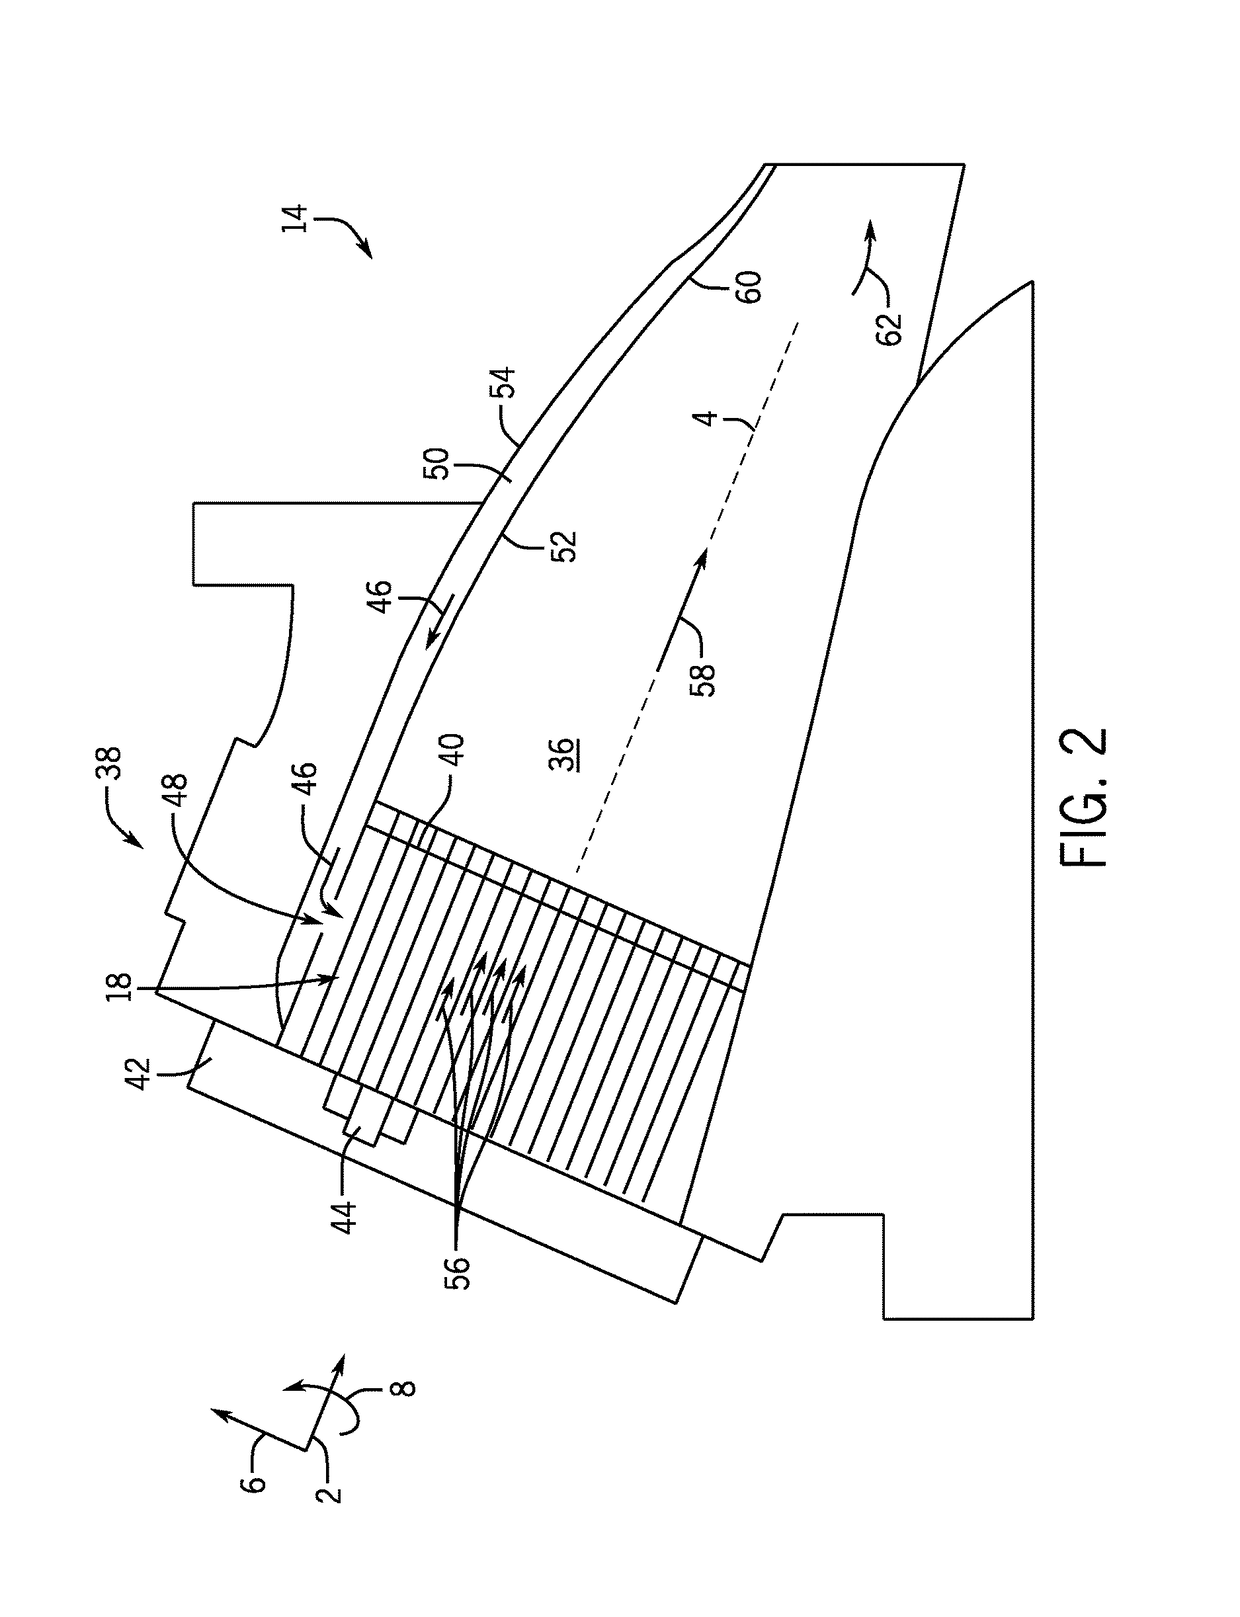 Fuel-air mixing system with mixing chambers of various lengths for gas turbine system